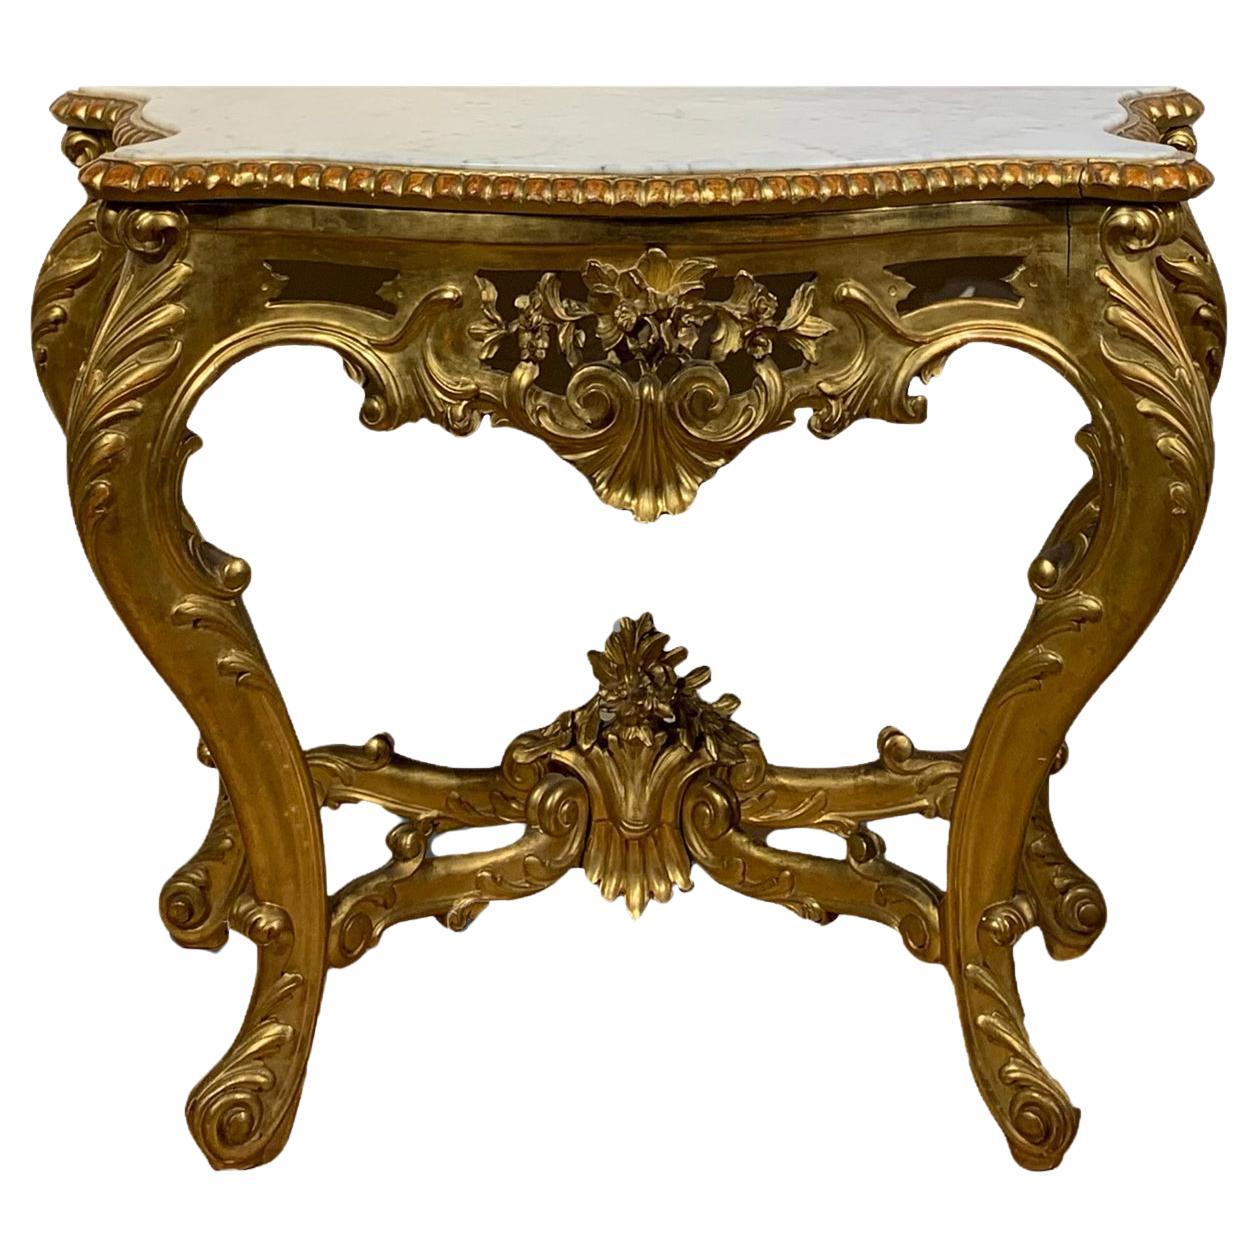 19th CENTURY CHARLES X GOLDEN CONSOLE